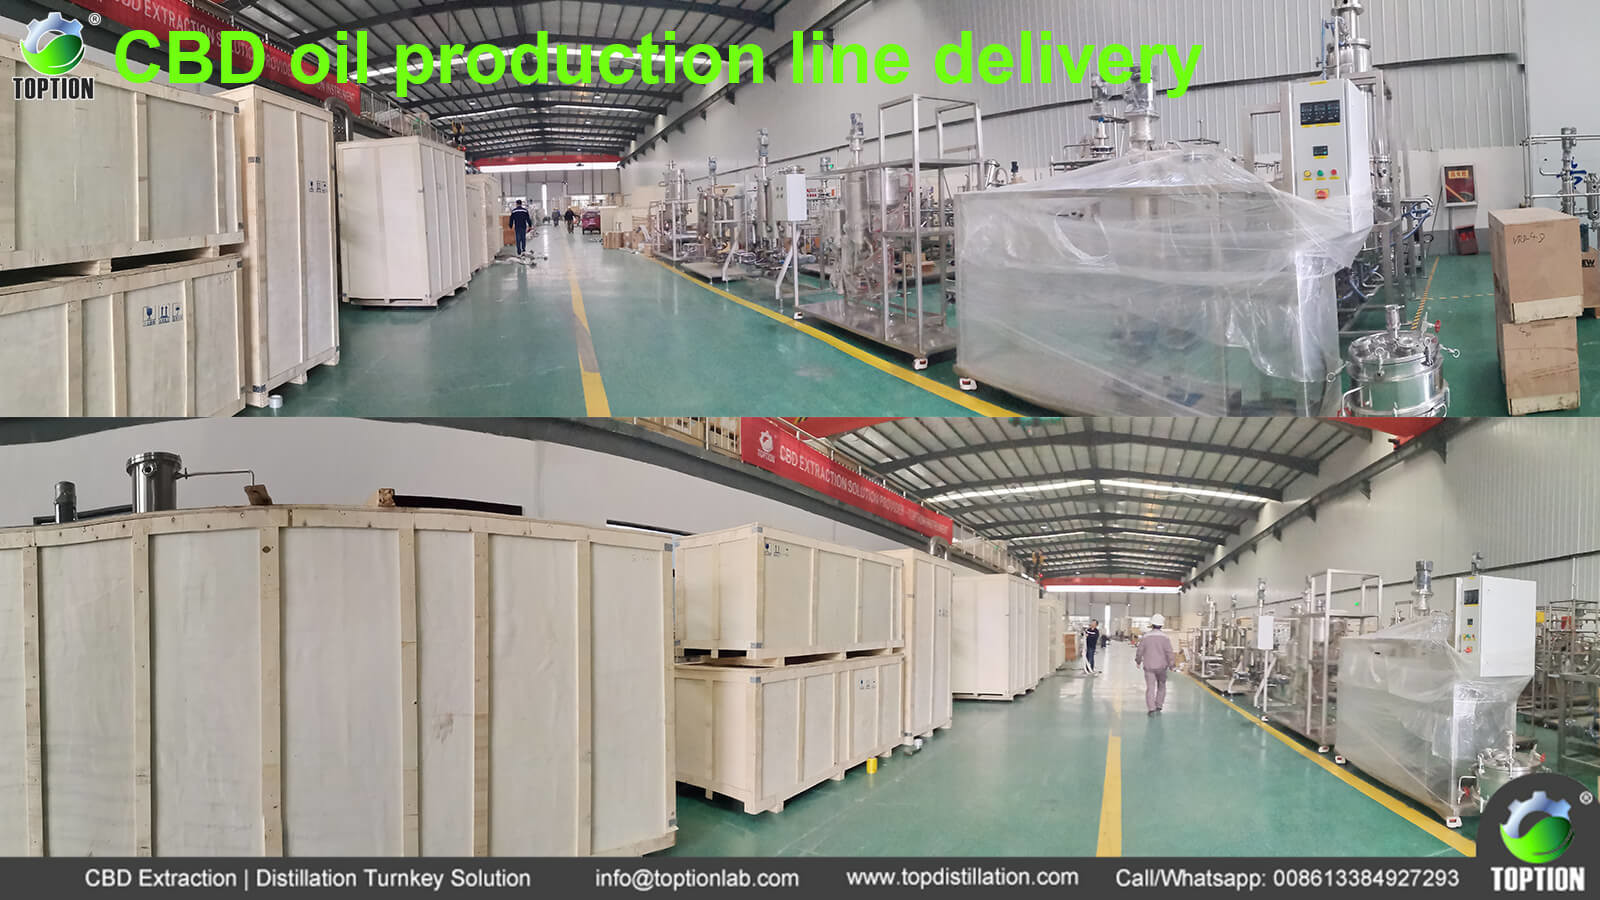 latest company news about CBD prodution line delivery successfully  0